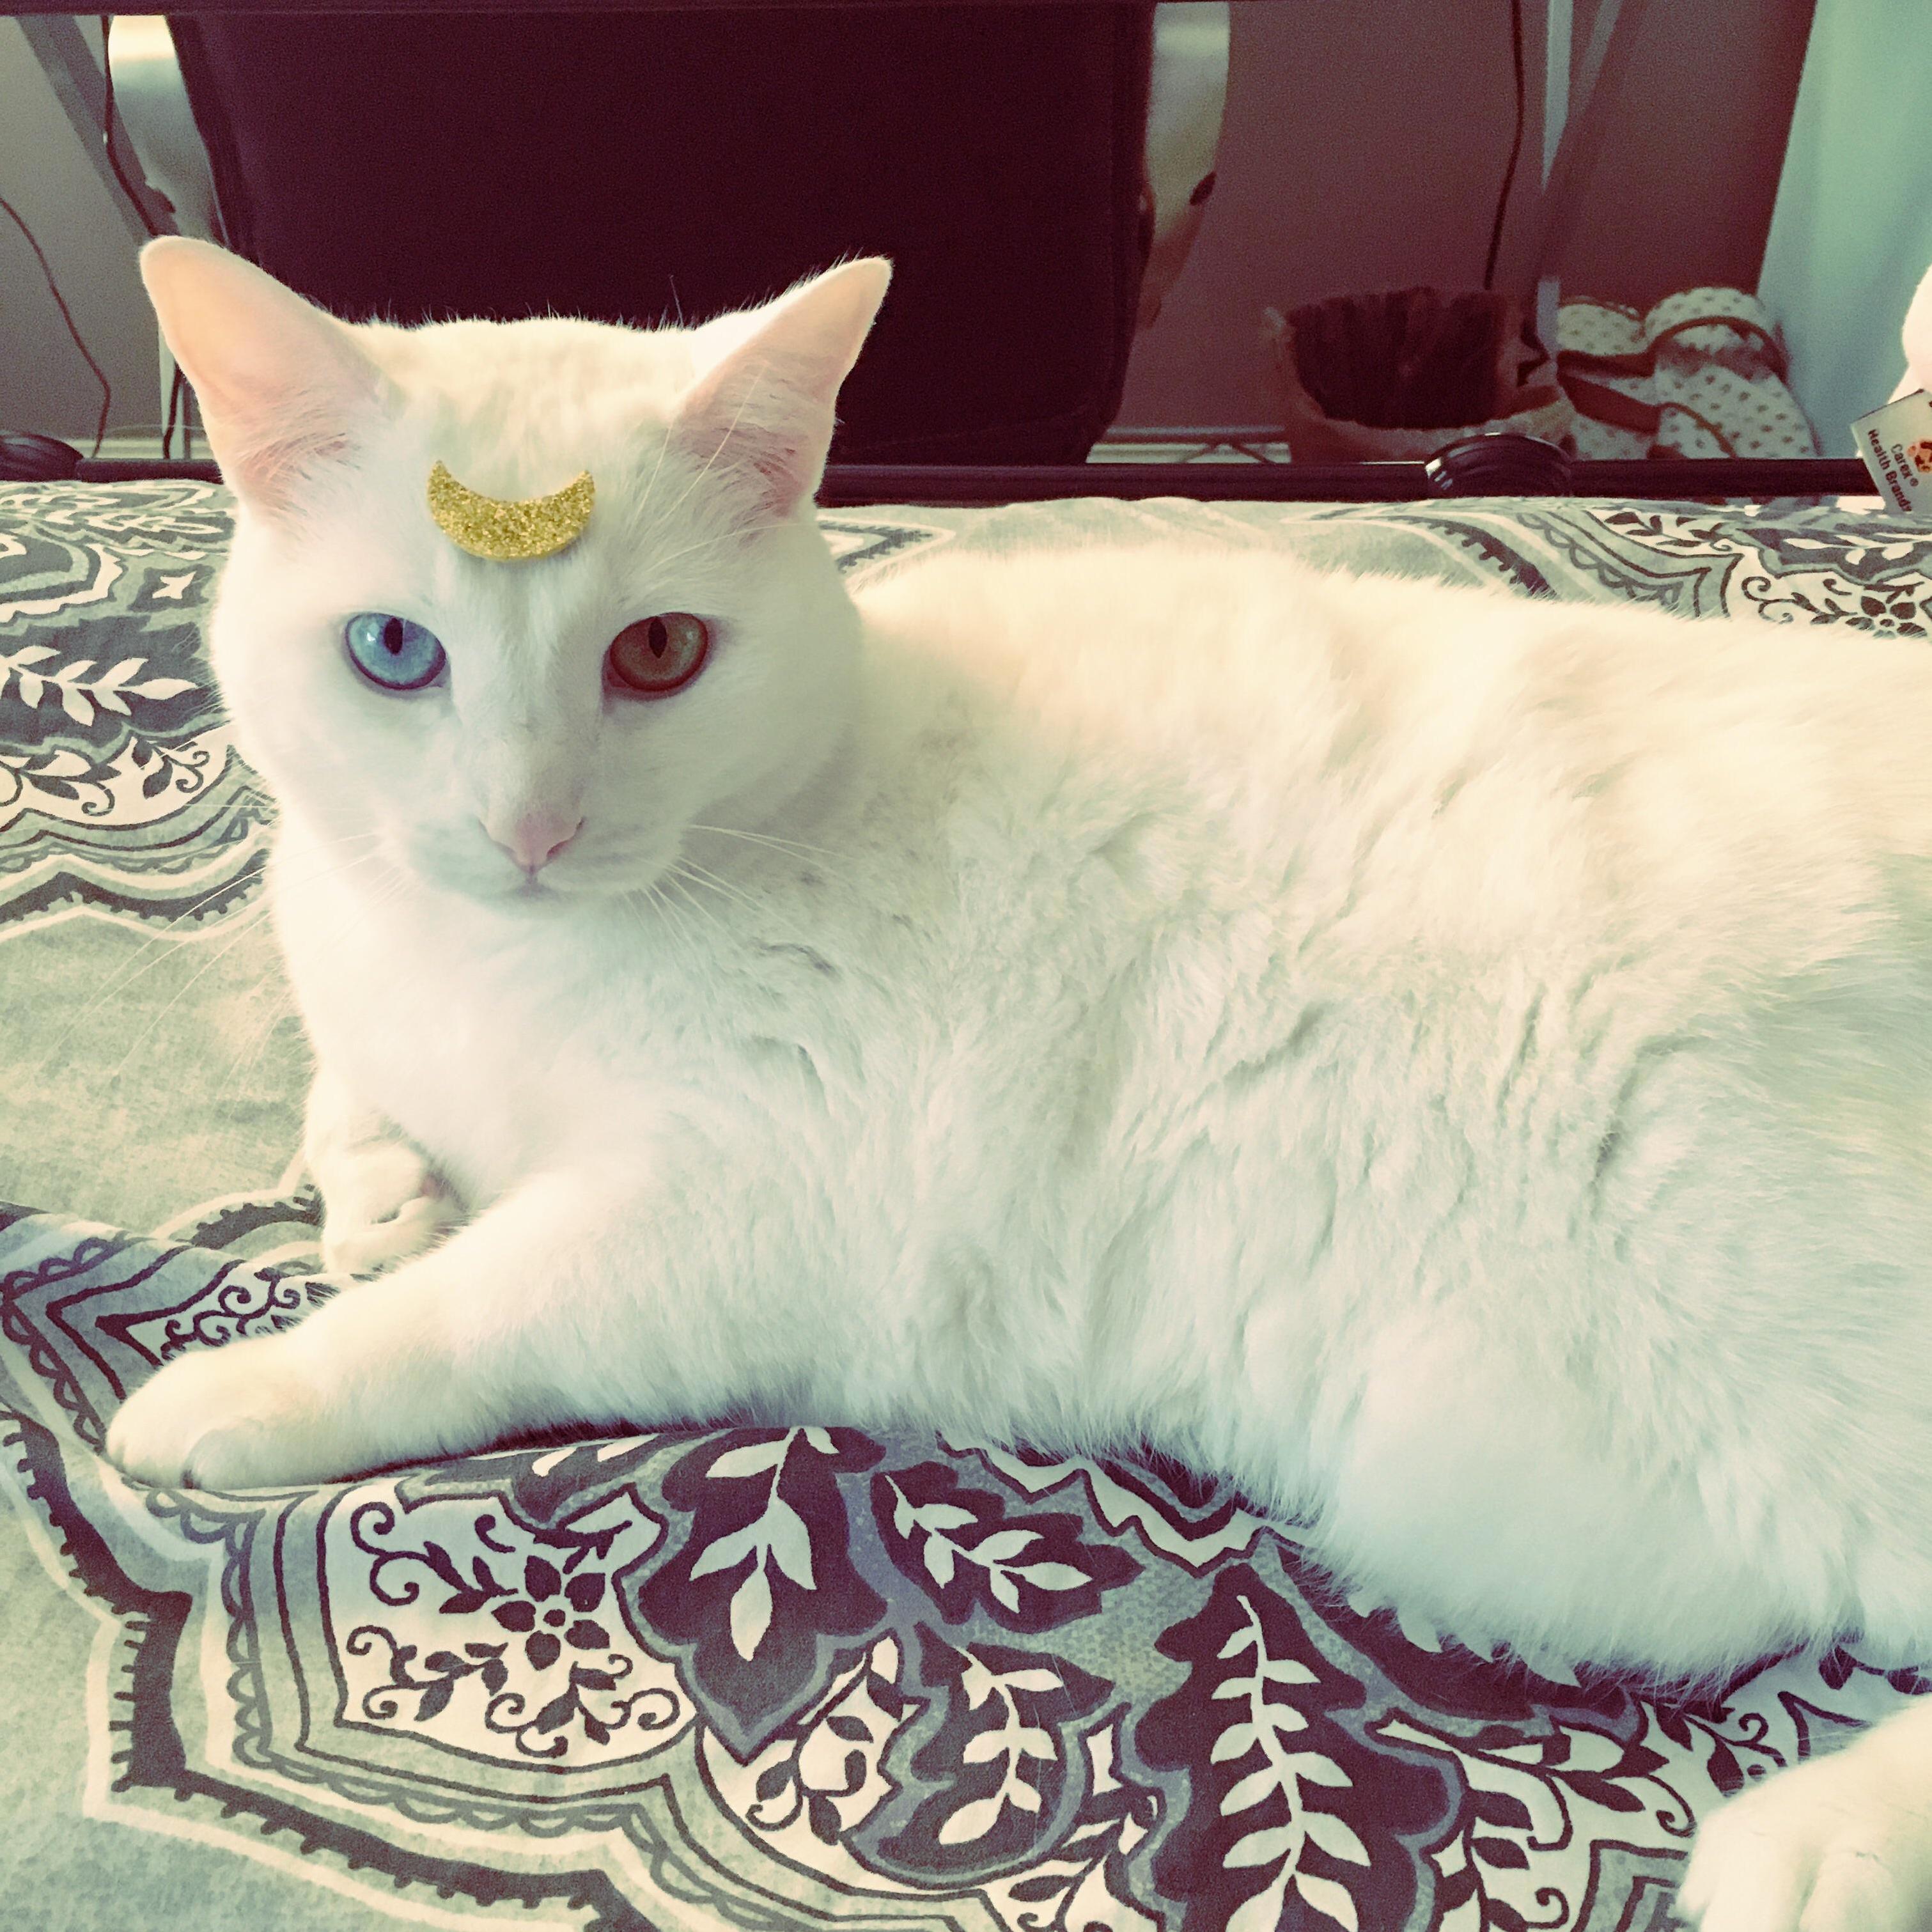 My cat could have been artemis from sailor moon in another life.